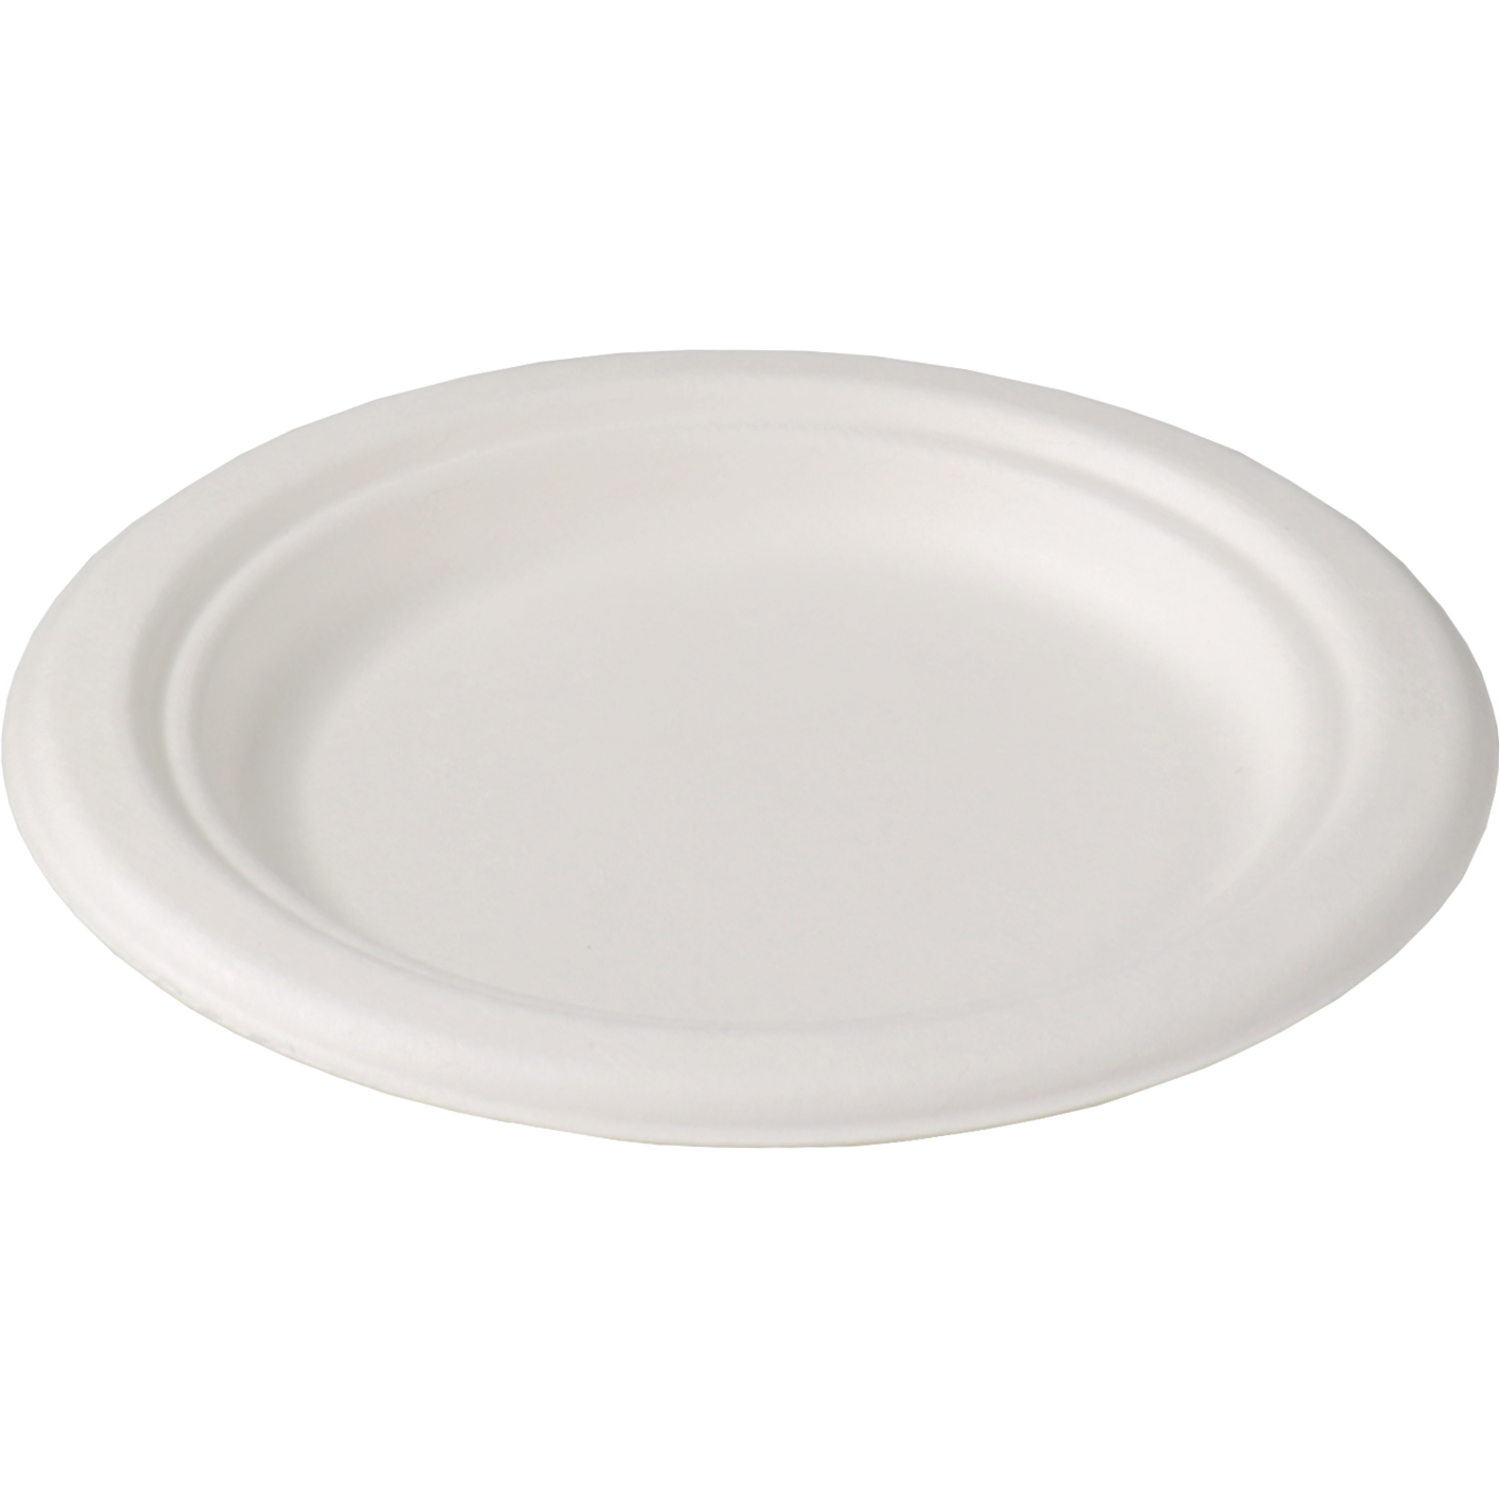 Depa® Plate, round, 1 compartment, bagasse (sugarcane pulp), Ø15cm, white 1